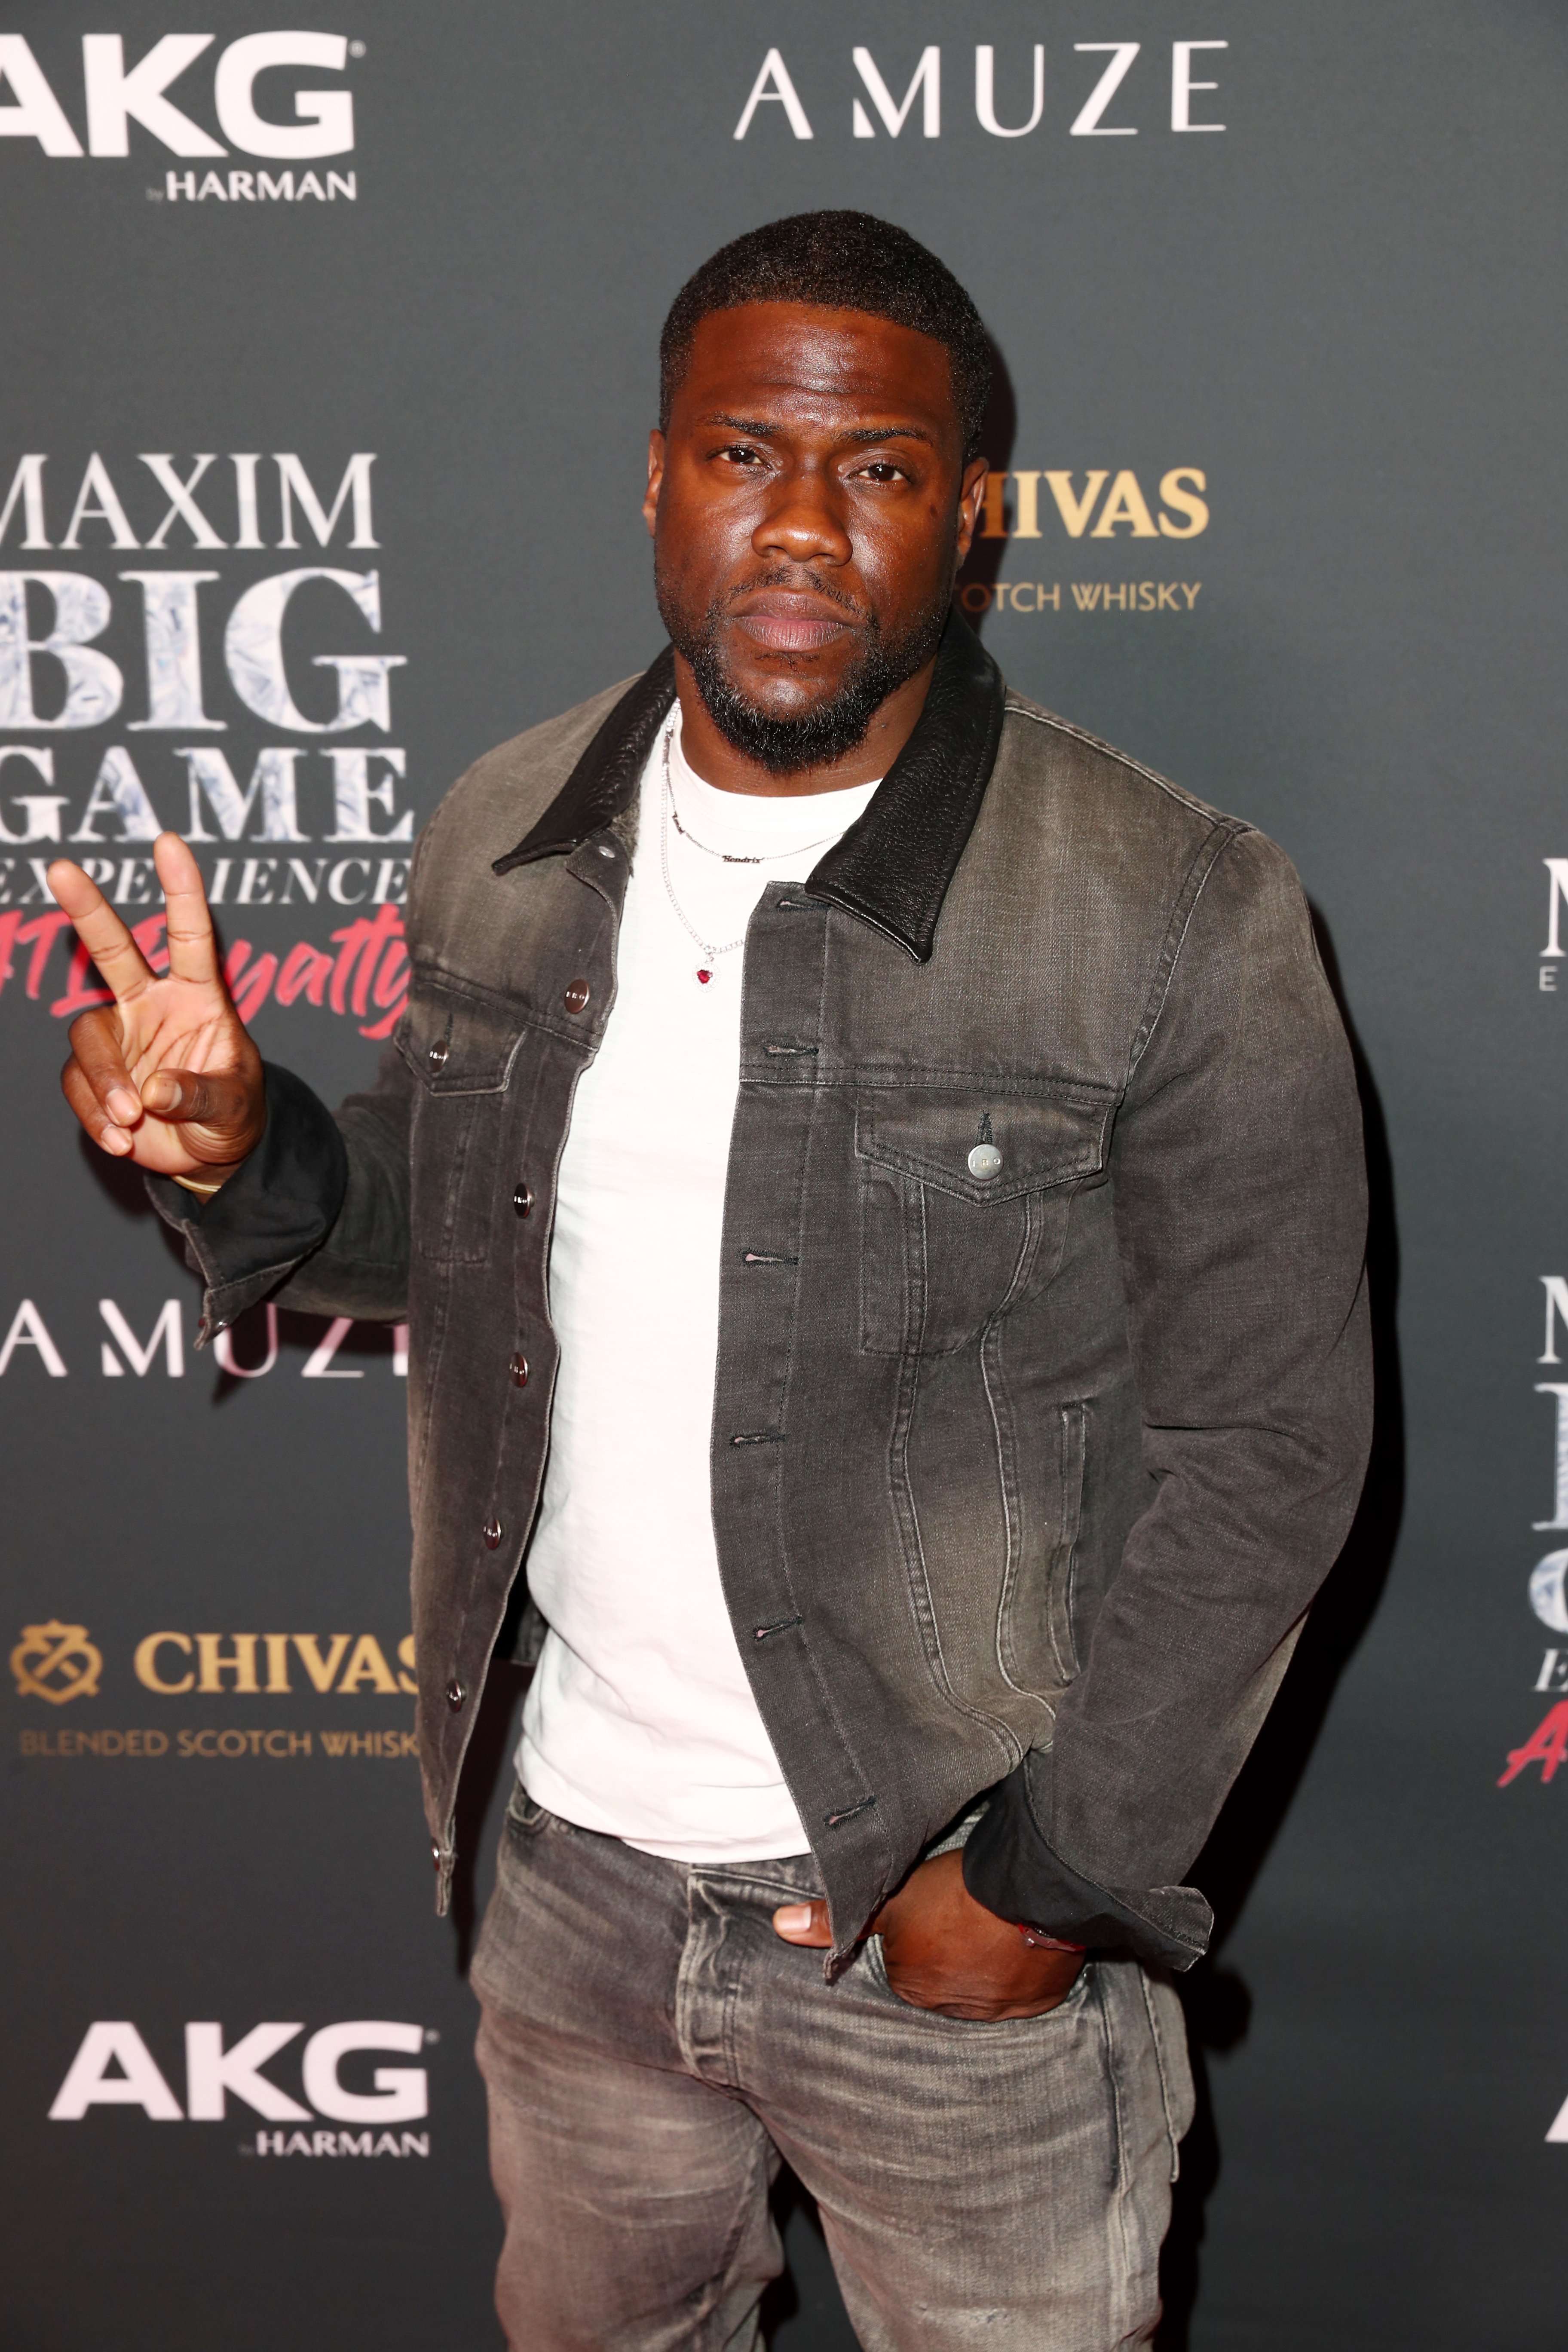 Kevin Hart attends The Maxim Big Game Experience at The Fairmont on February 02, 2019, in Atlanta, Georgia. | Source: Getty Images.